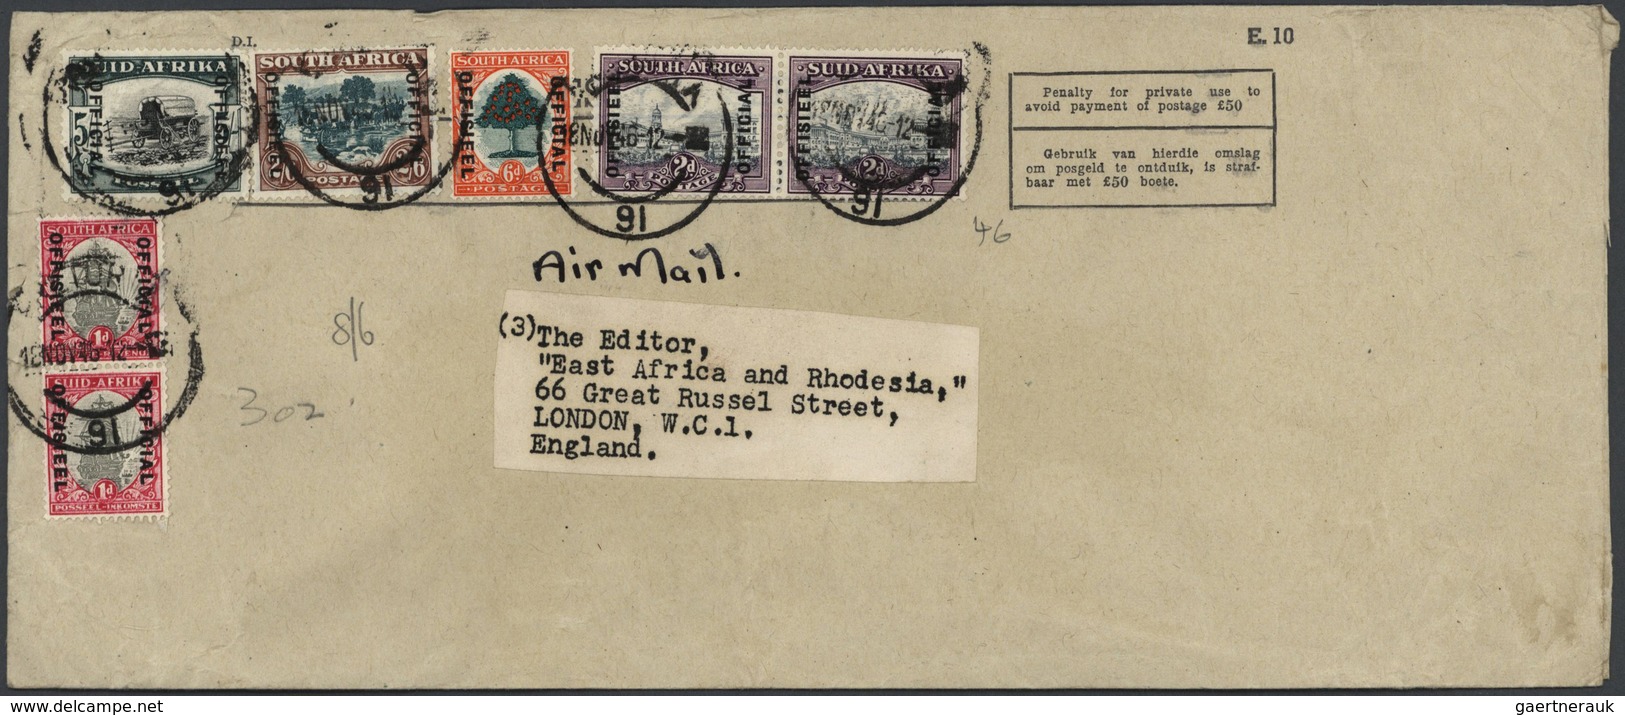 Südafrika - Dienstmarken: 1941/47, Covers (7 Inc. 4 By Air Mail) All Used To The Editor, "East Afric - Timbres De Service